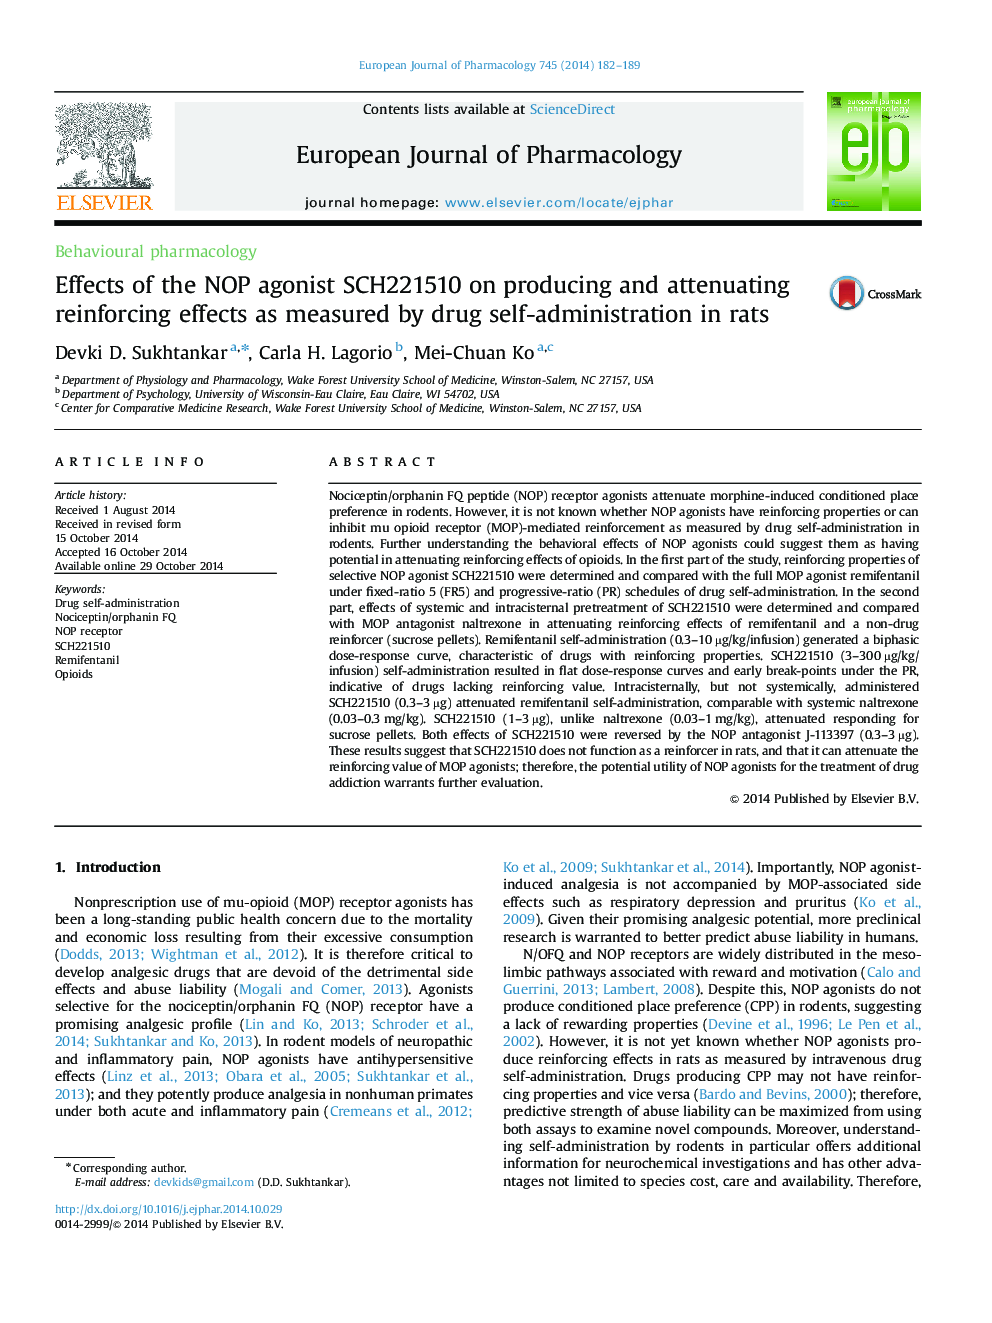 Effects of the NOP agonist SCH221510 on producing and attenuating reinforcing effects as measured by drug self-administration in rats